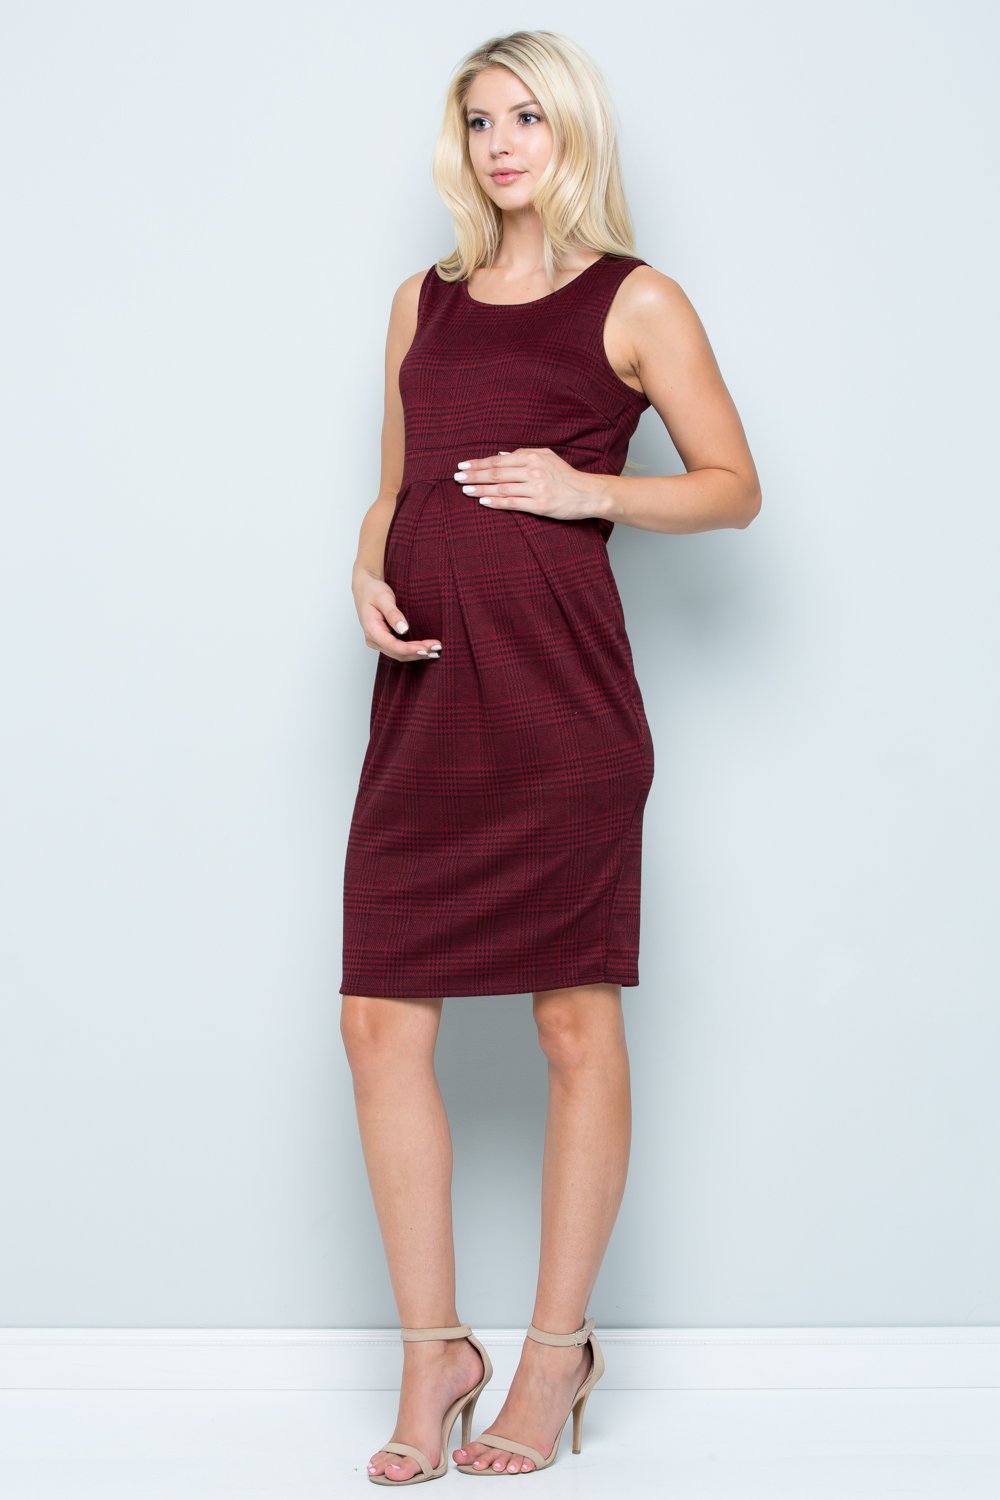 maternity pregnancy baby shower relaxed sleeveless round neck above knee spring summer fall cocktail dress